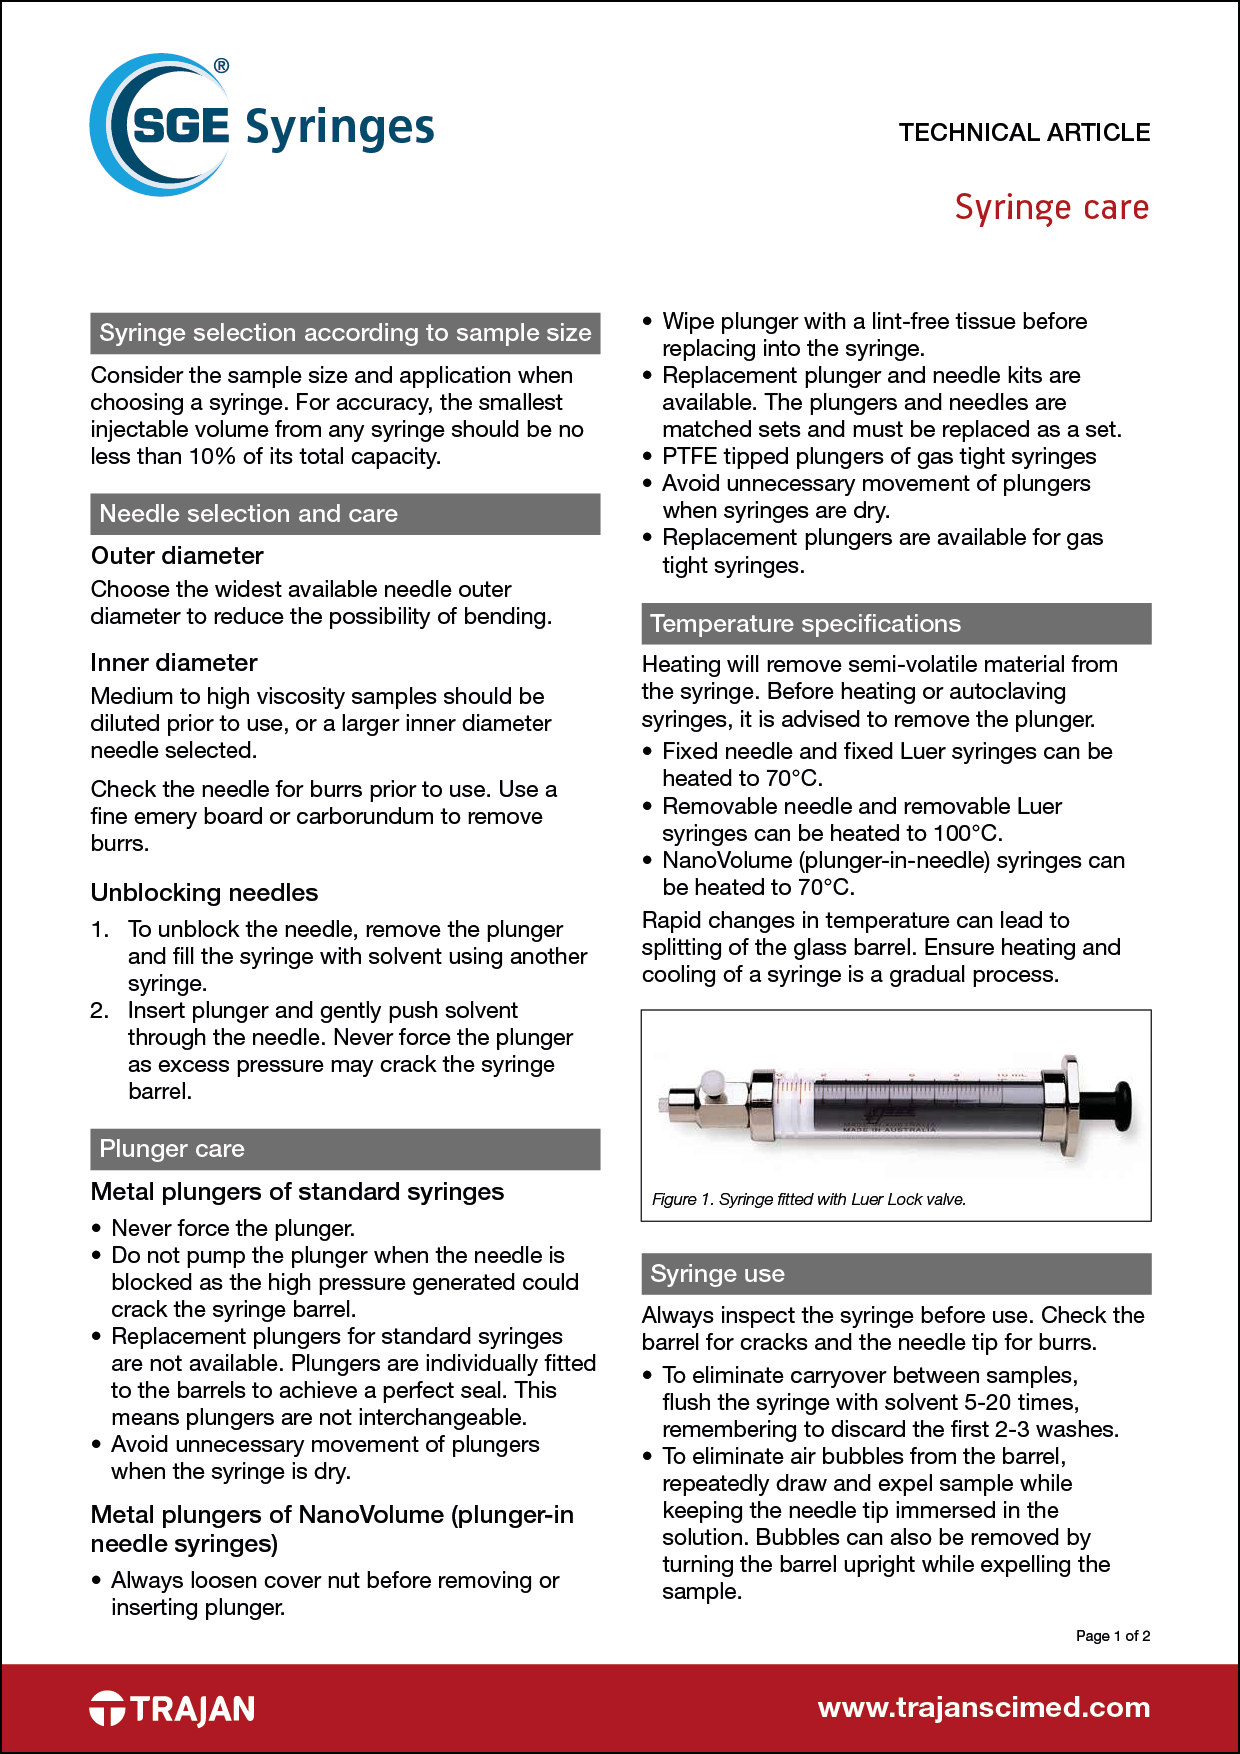 Technical Article - Syringe care